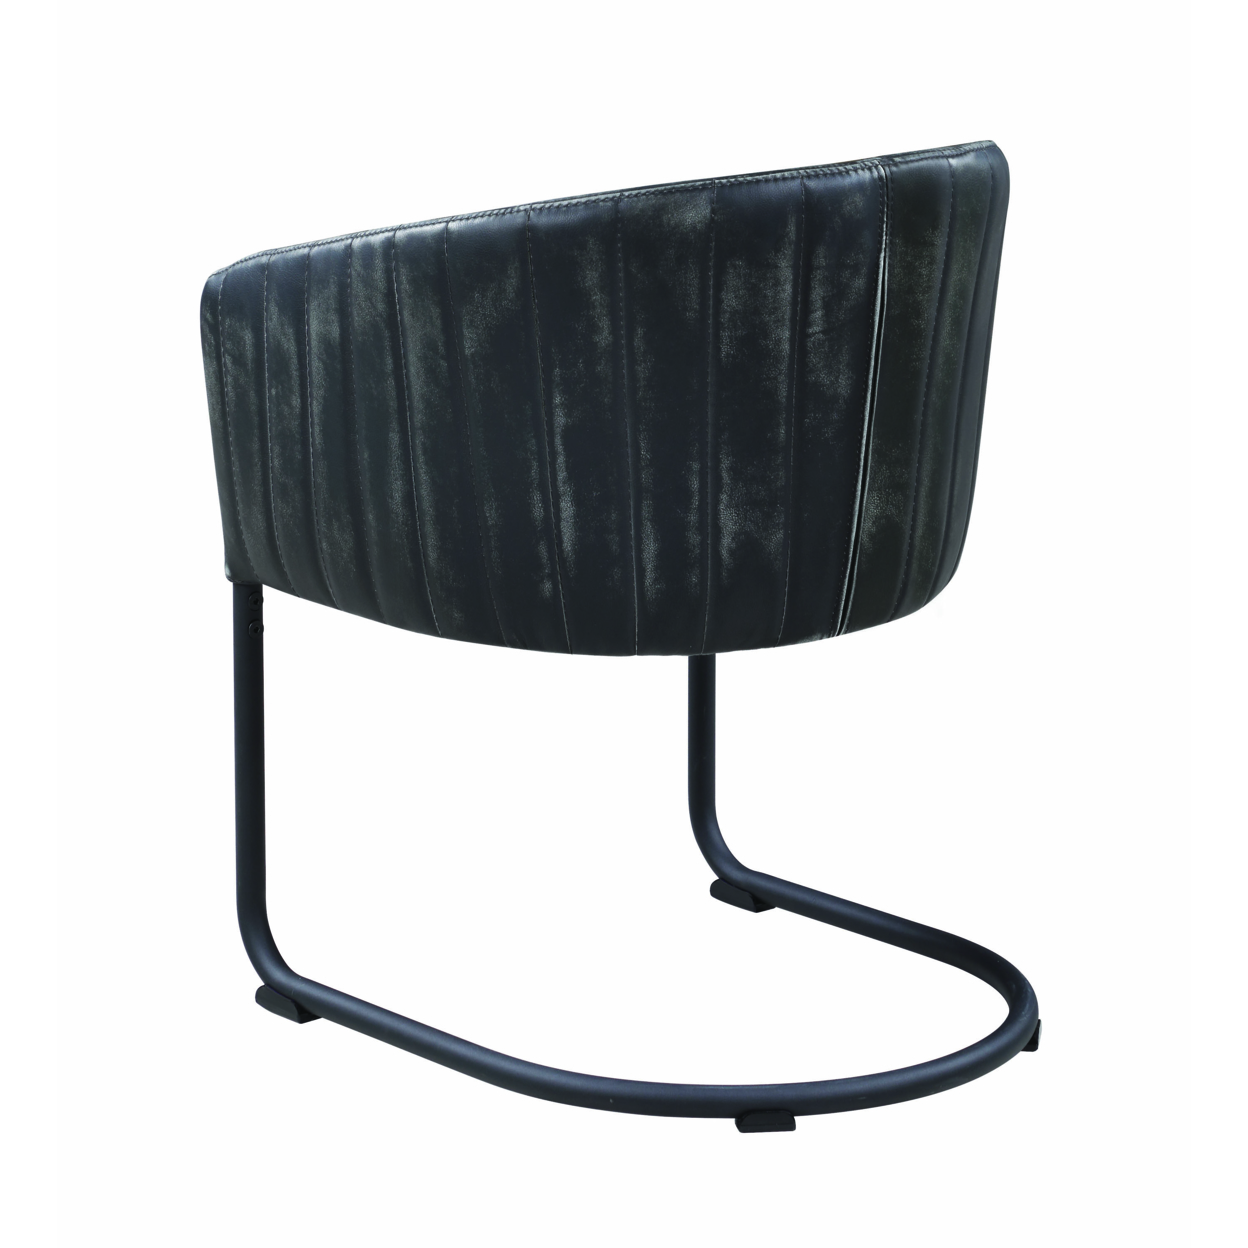 Vertically Stitched Faux Leather Upholstered Dining Chair With Metal Cantilever Base, Black- Saltoro Sherpi